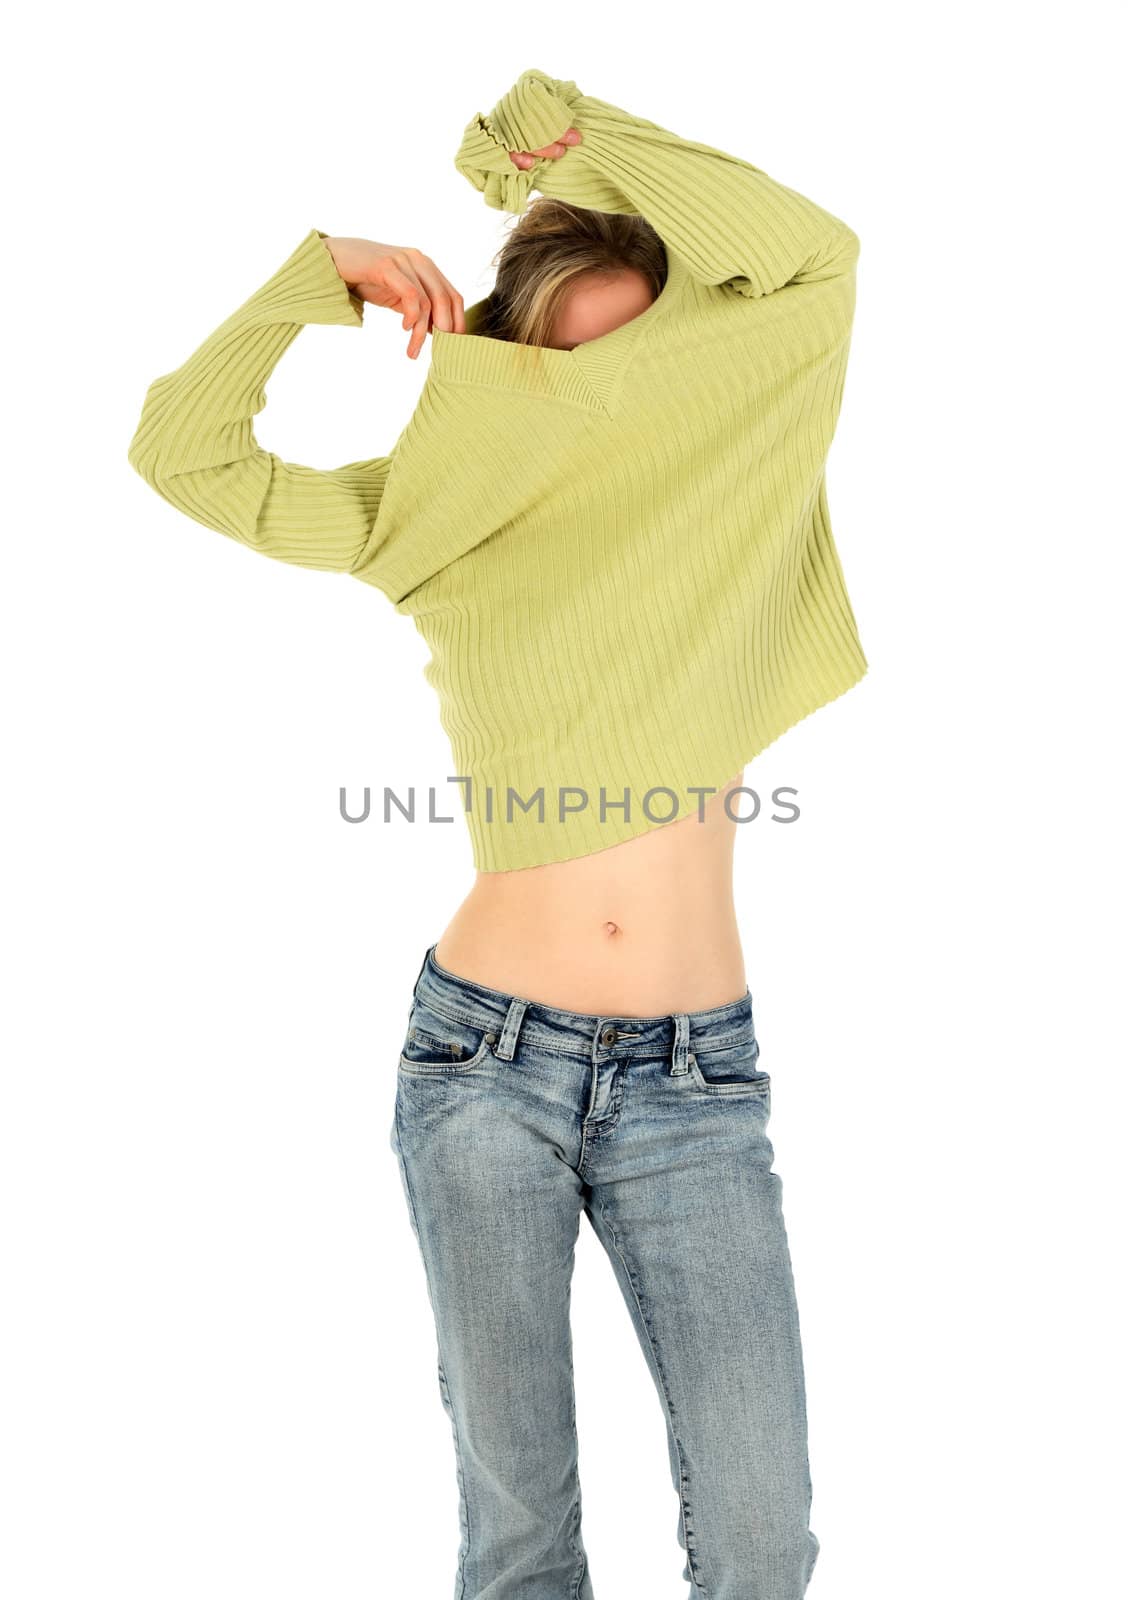 Woman in jeans takes off a green sweater by anikasalsera